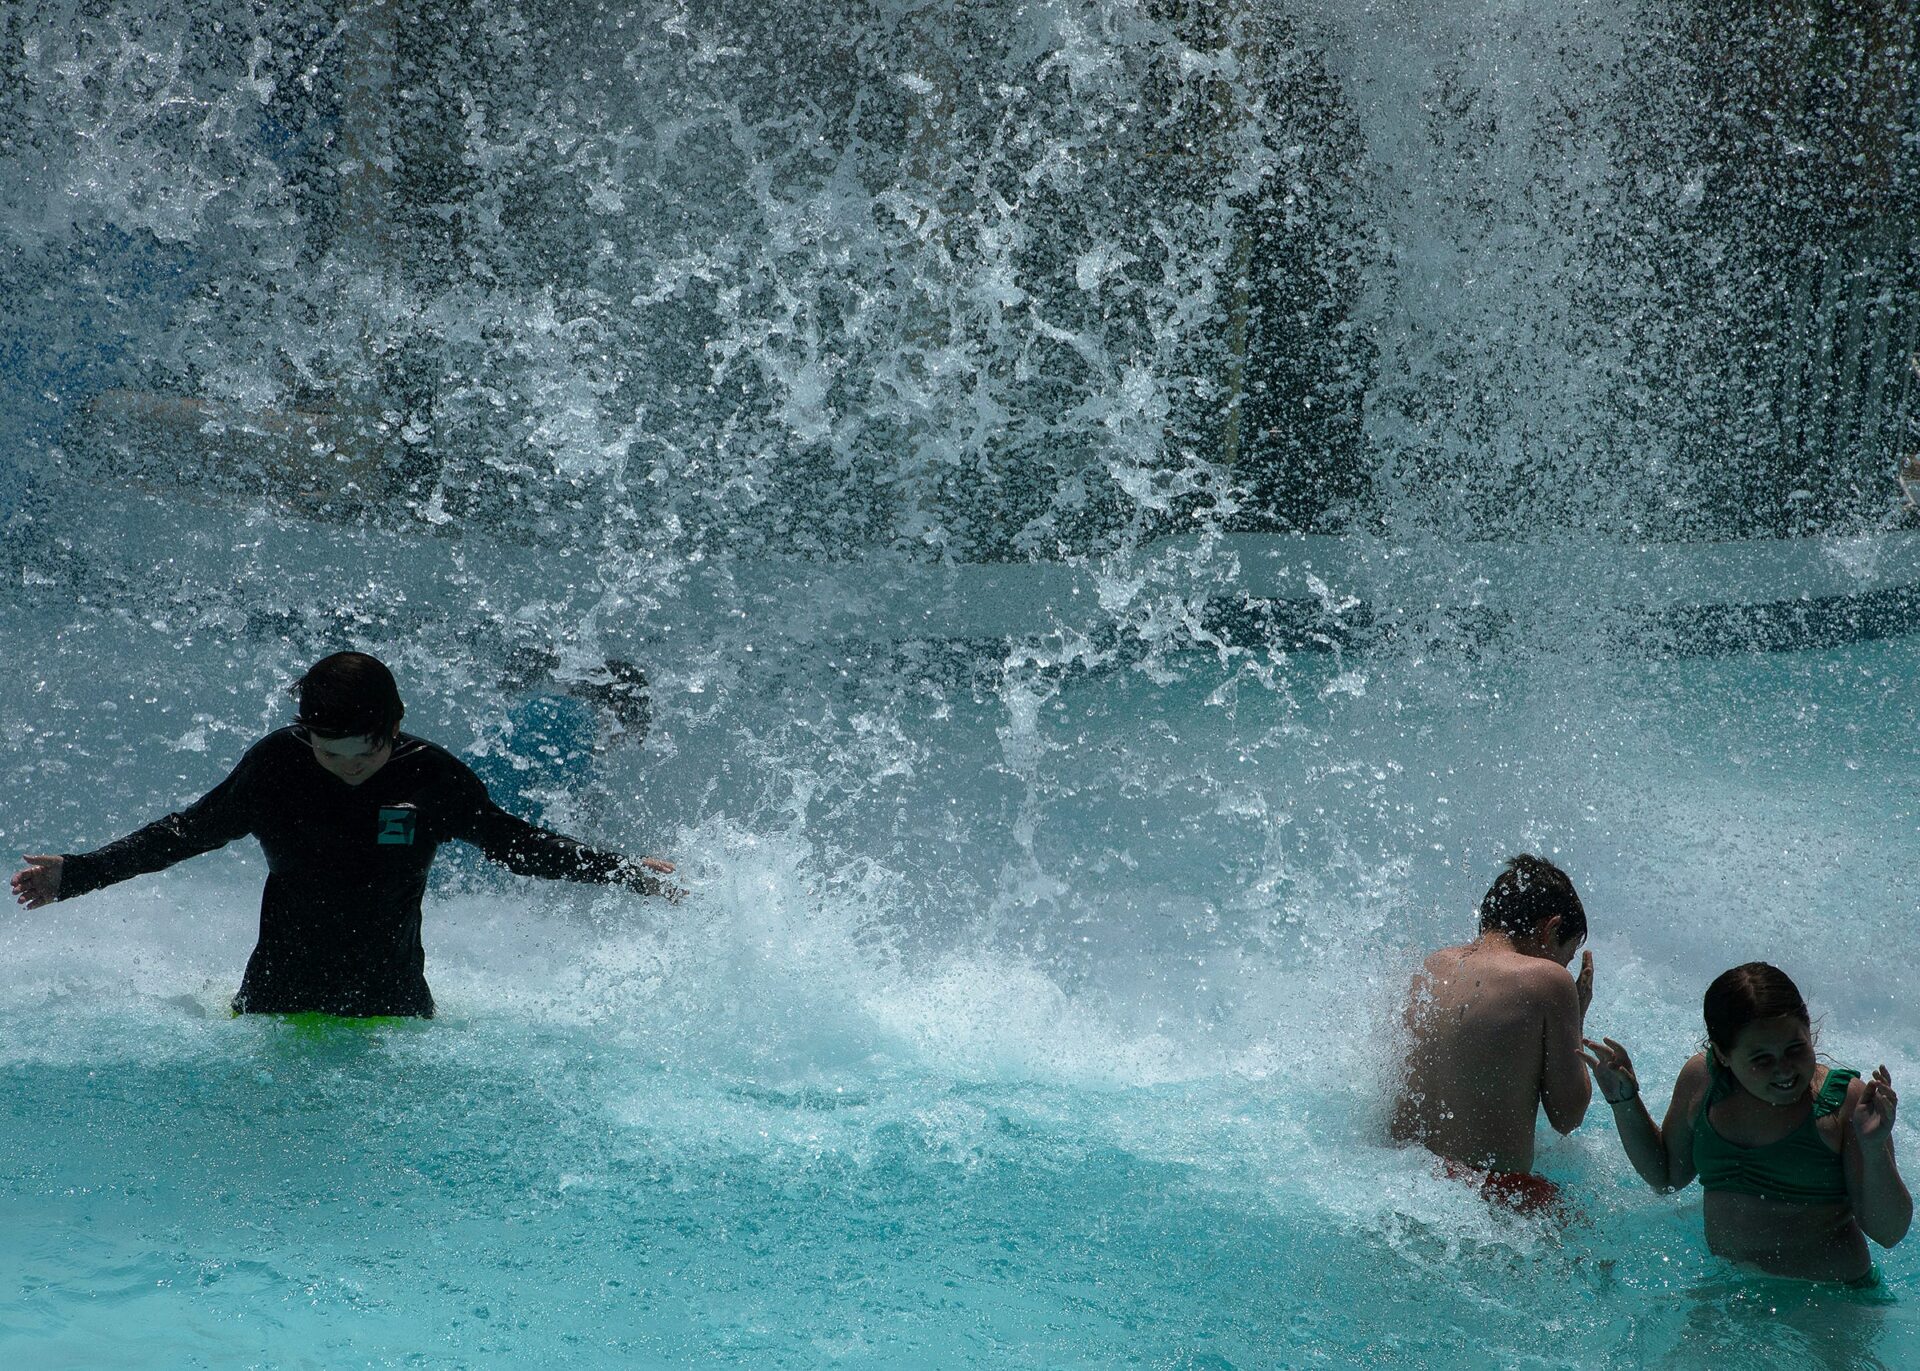 12-Year-Old Dies Of A ‘Medical Incident’ At California Water Park [VIDEO]